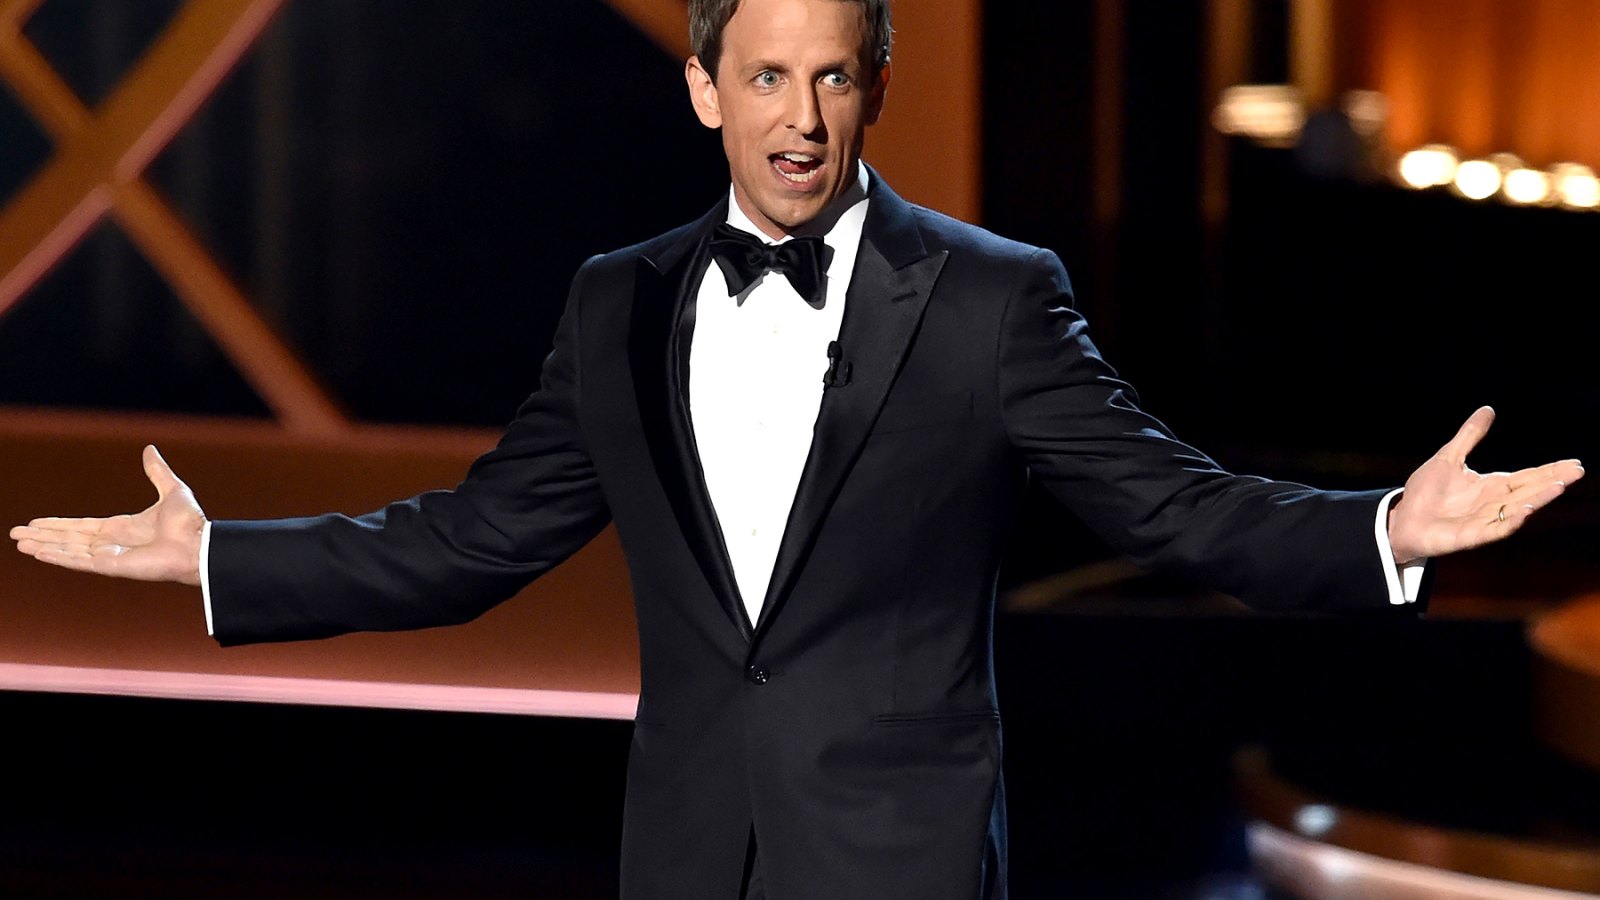 Seth Meyers and Alexi Ashe attend the Annual Primetime Emmy Awards